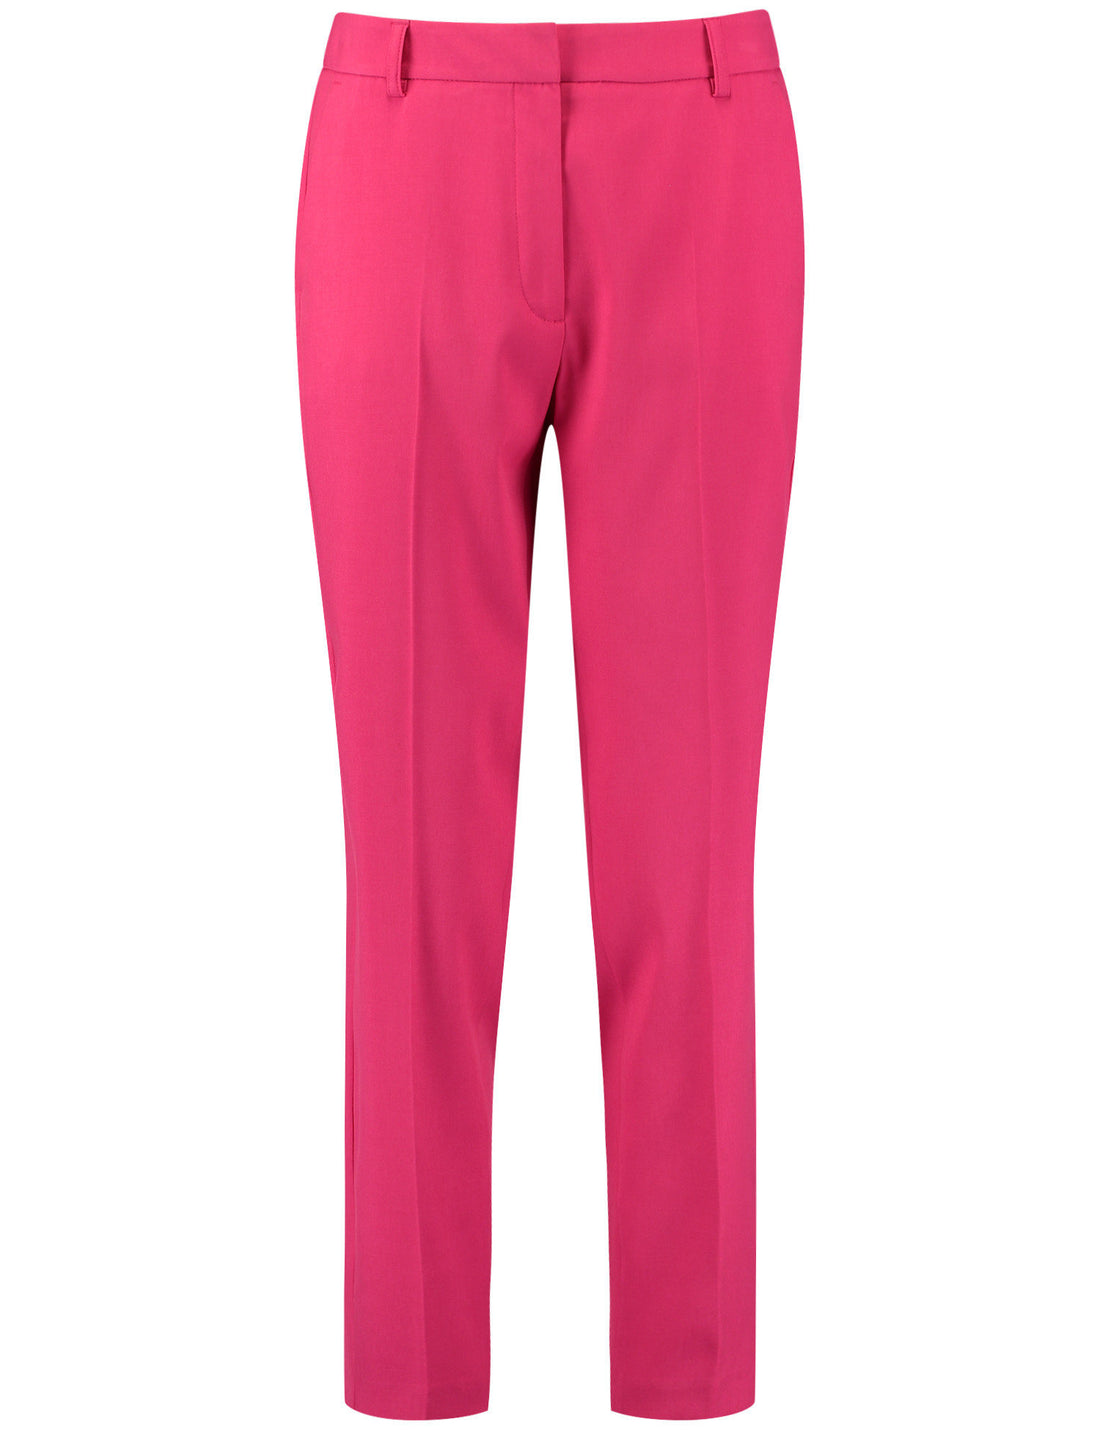 Fine 7/8 Length Trousers In A Slim Fit_420413-11254_3400_02